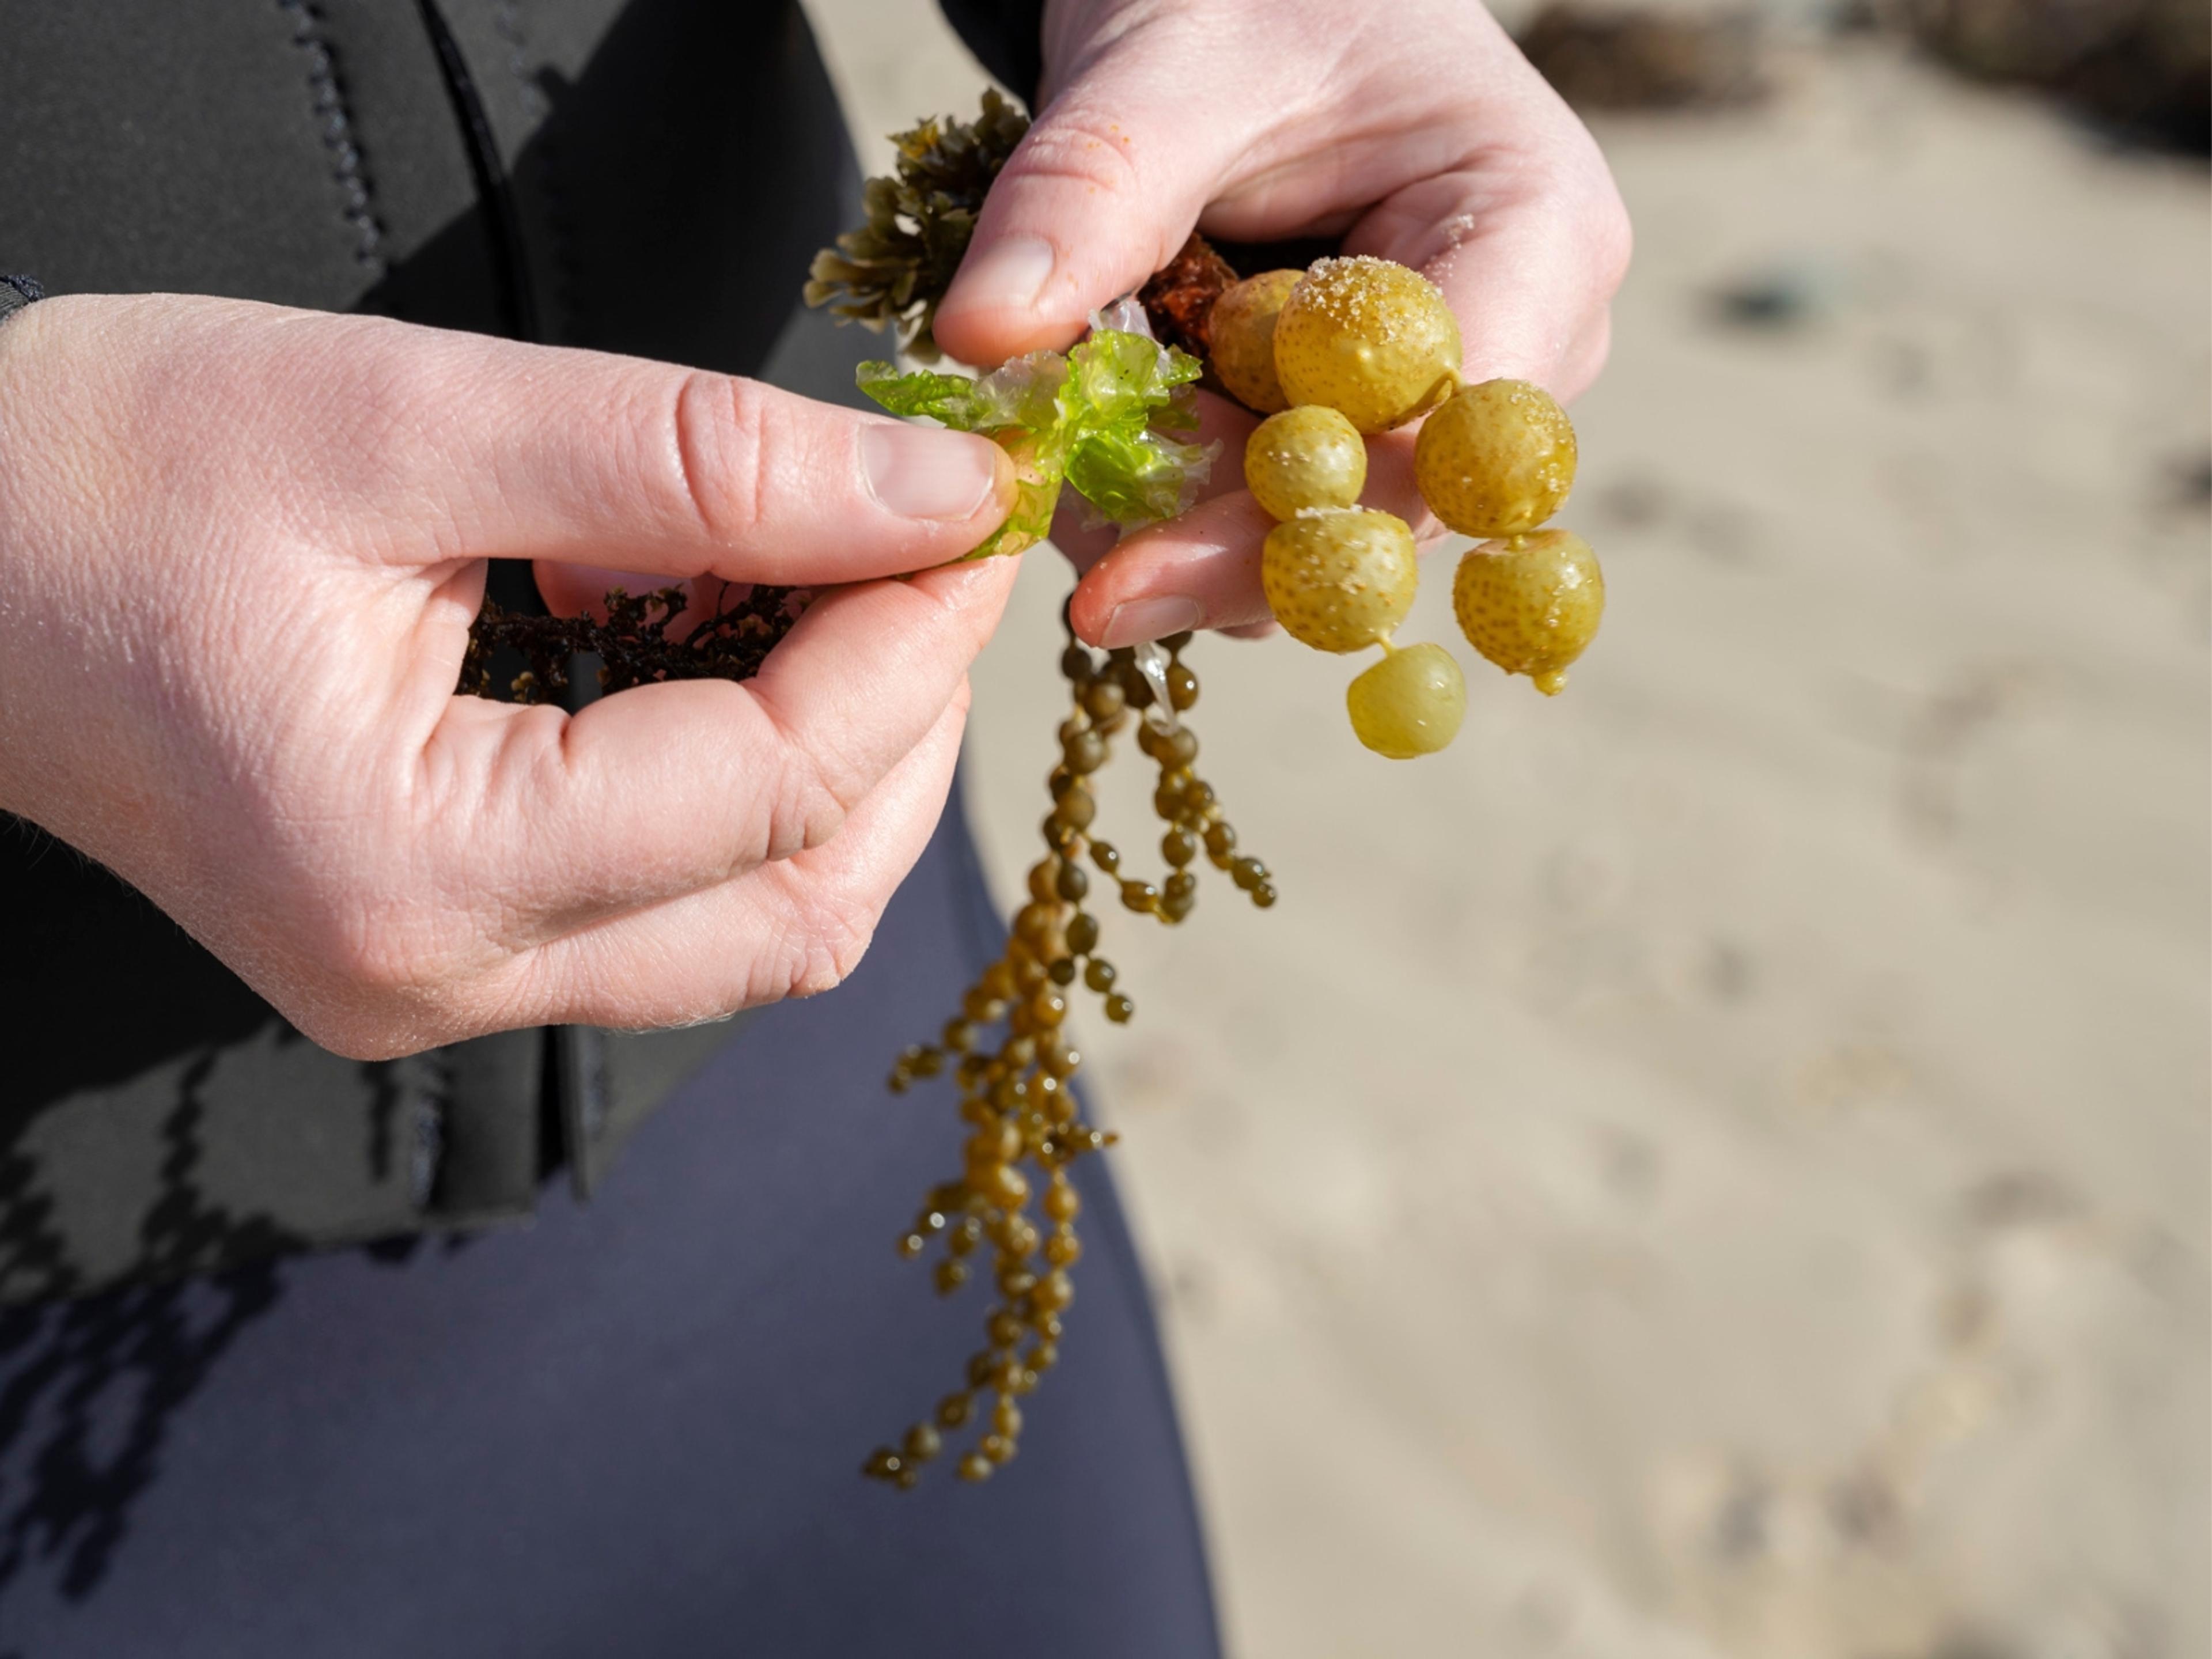 A close up of a person's hands holding some seaweed. They are wearing a wetsuit.